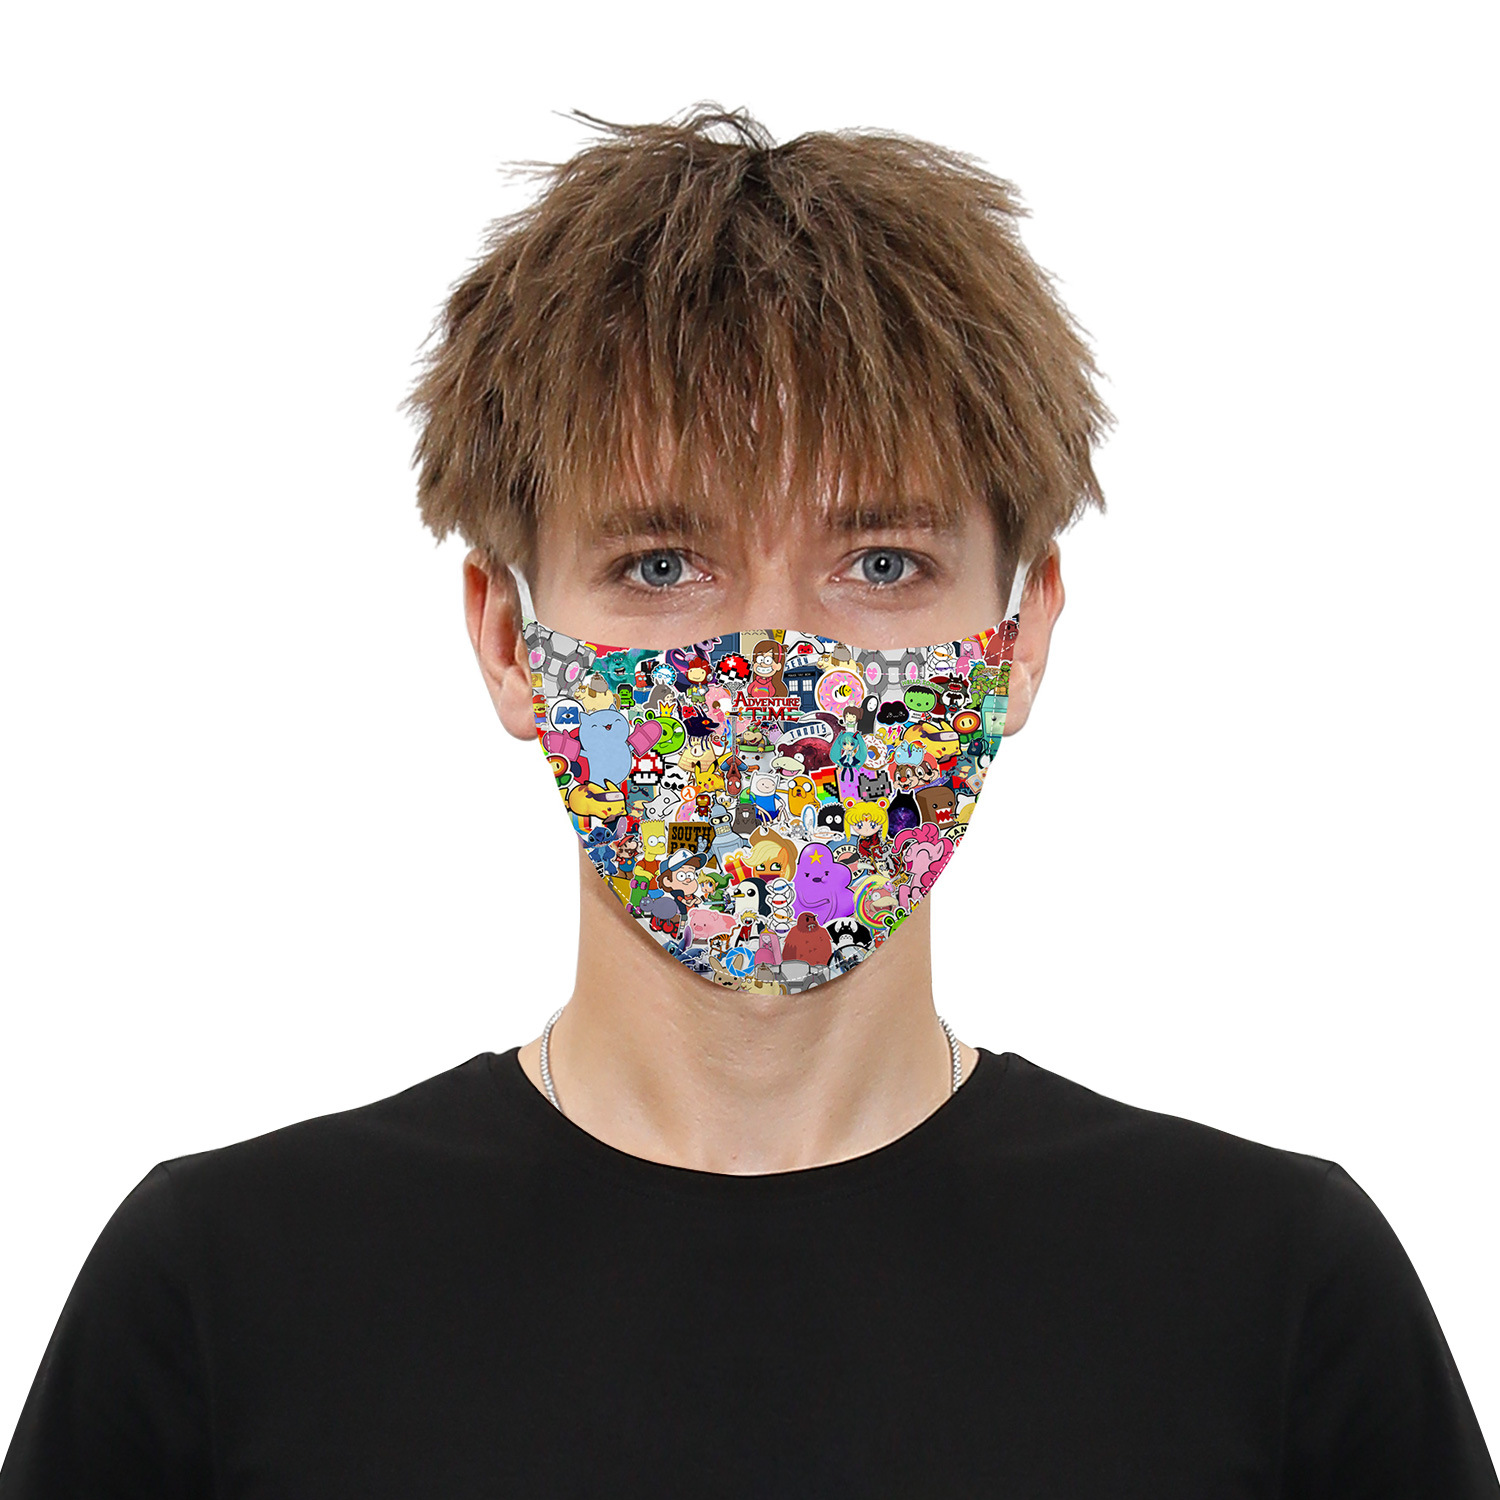 InkDigital-series-Double-Chip-Anti-PM25-Dust-proof-Face-Mask-Breathable-Protective-Mask-Windproof-Fo-1664842-9